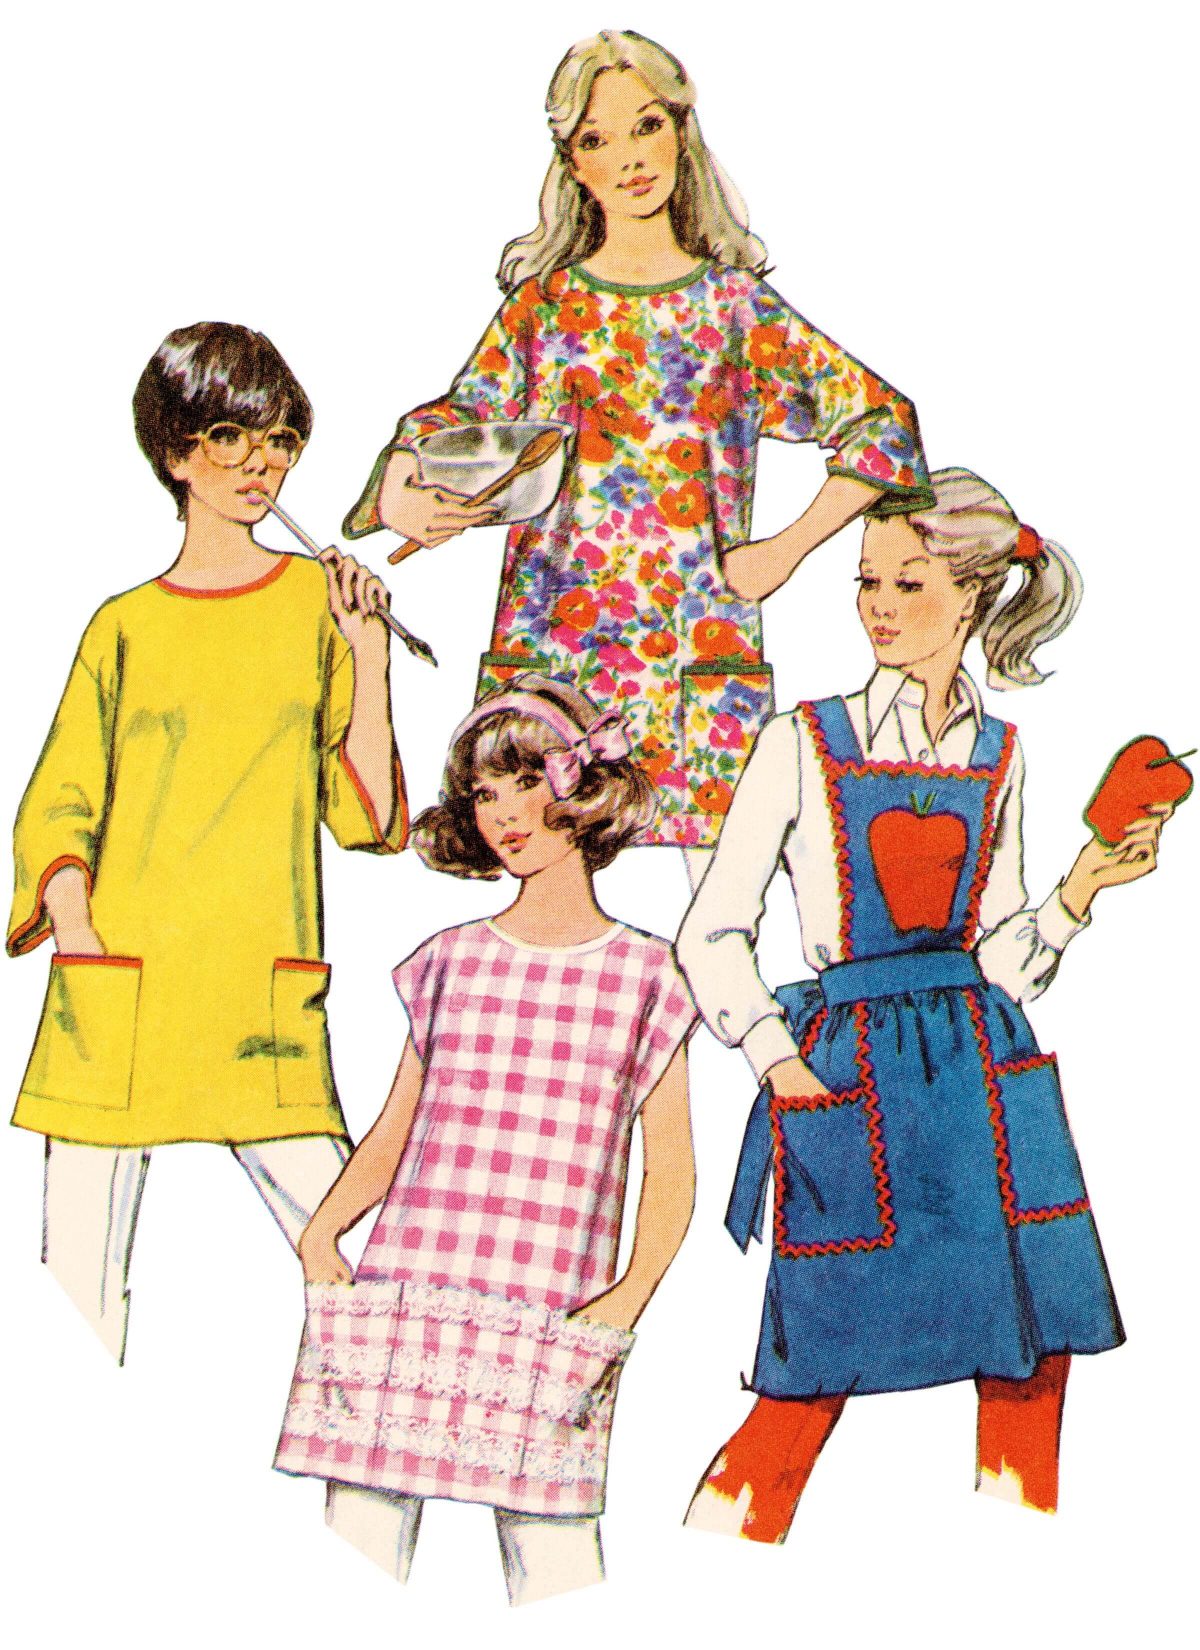 Simplicity Sewing Pattern S9868 Aprons and Potholder